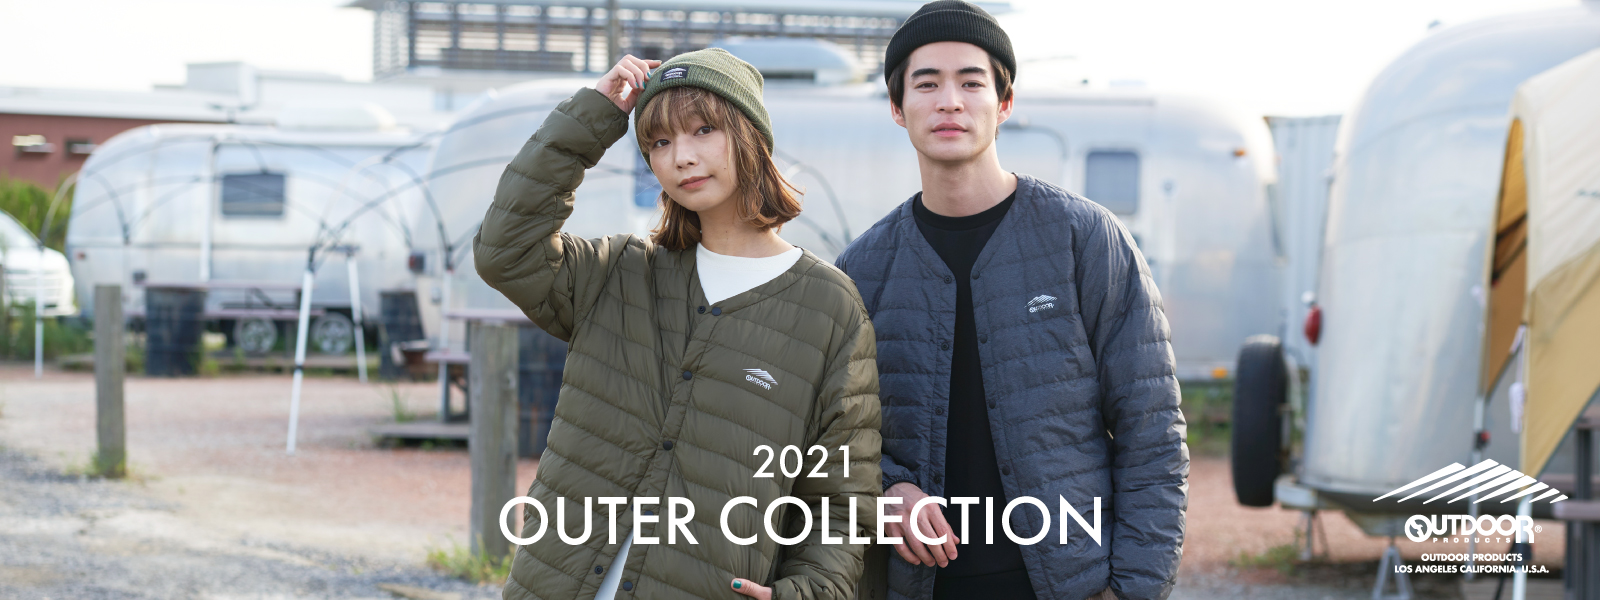 2021 OUTDOOR PRODUCTS OUTER COLLECTION